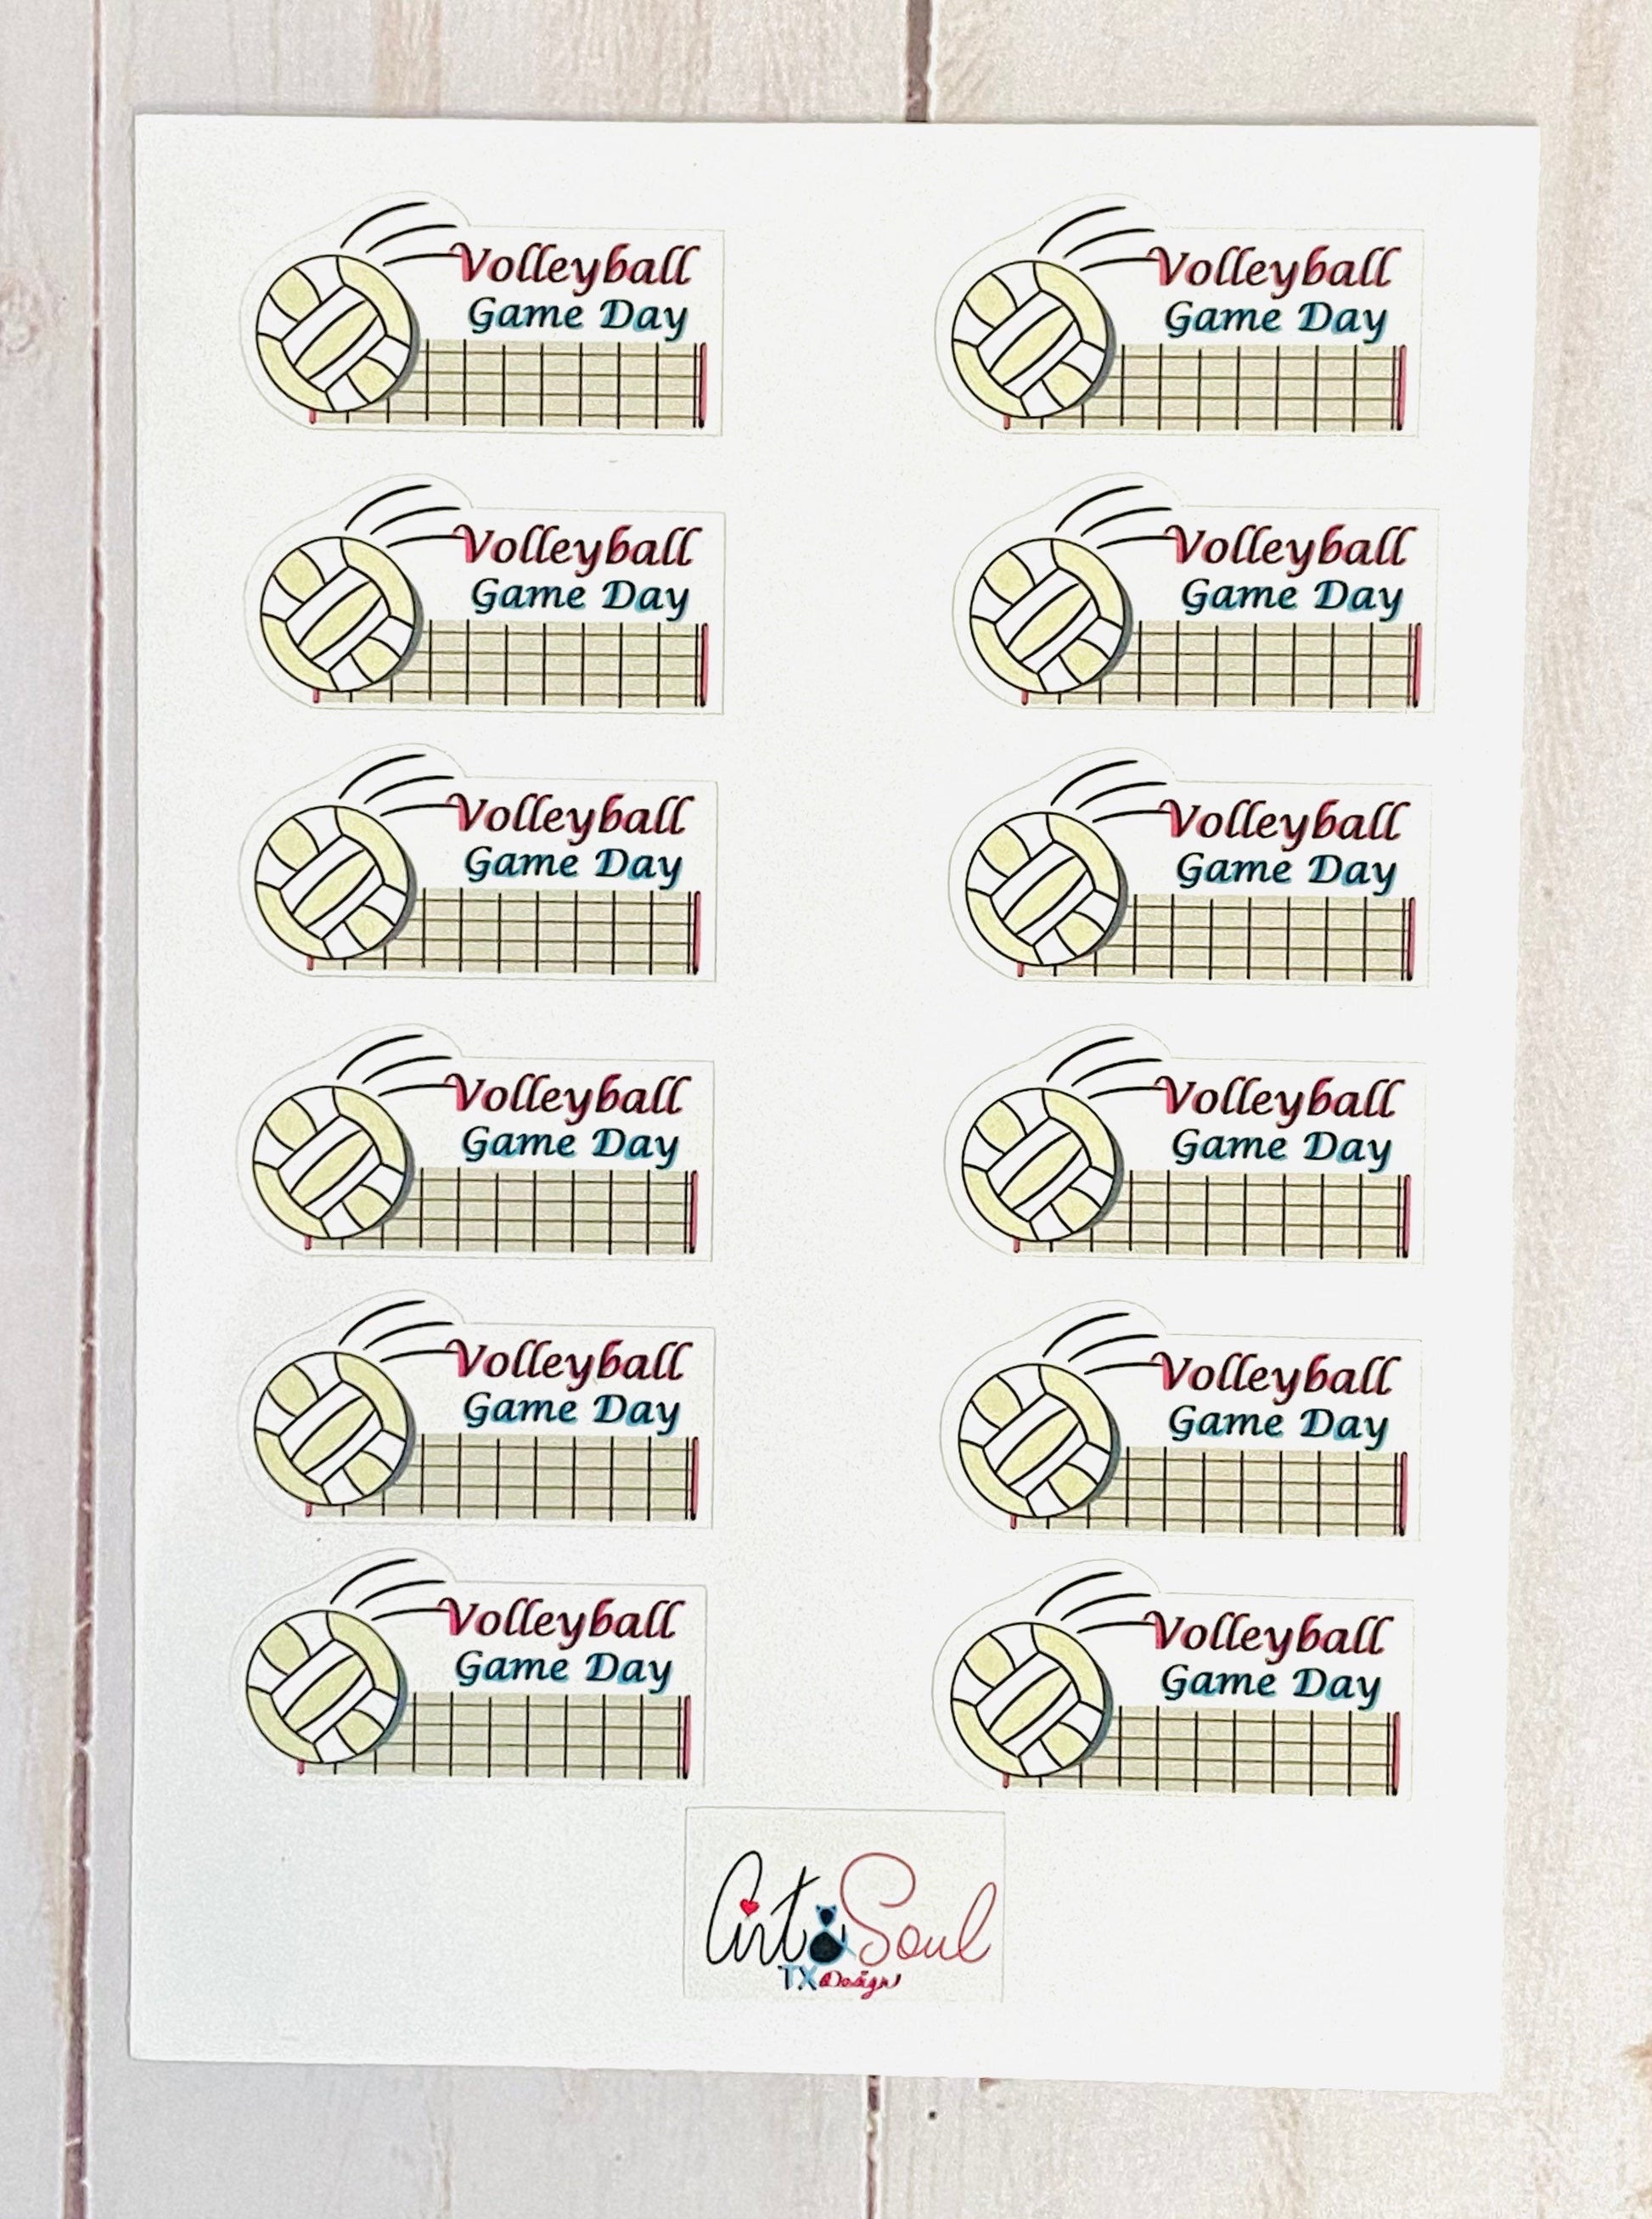 A Volleyball Game Day planner sticker sheet on a volleyball court background.